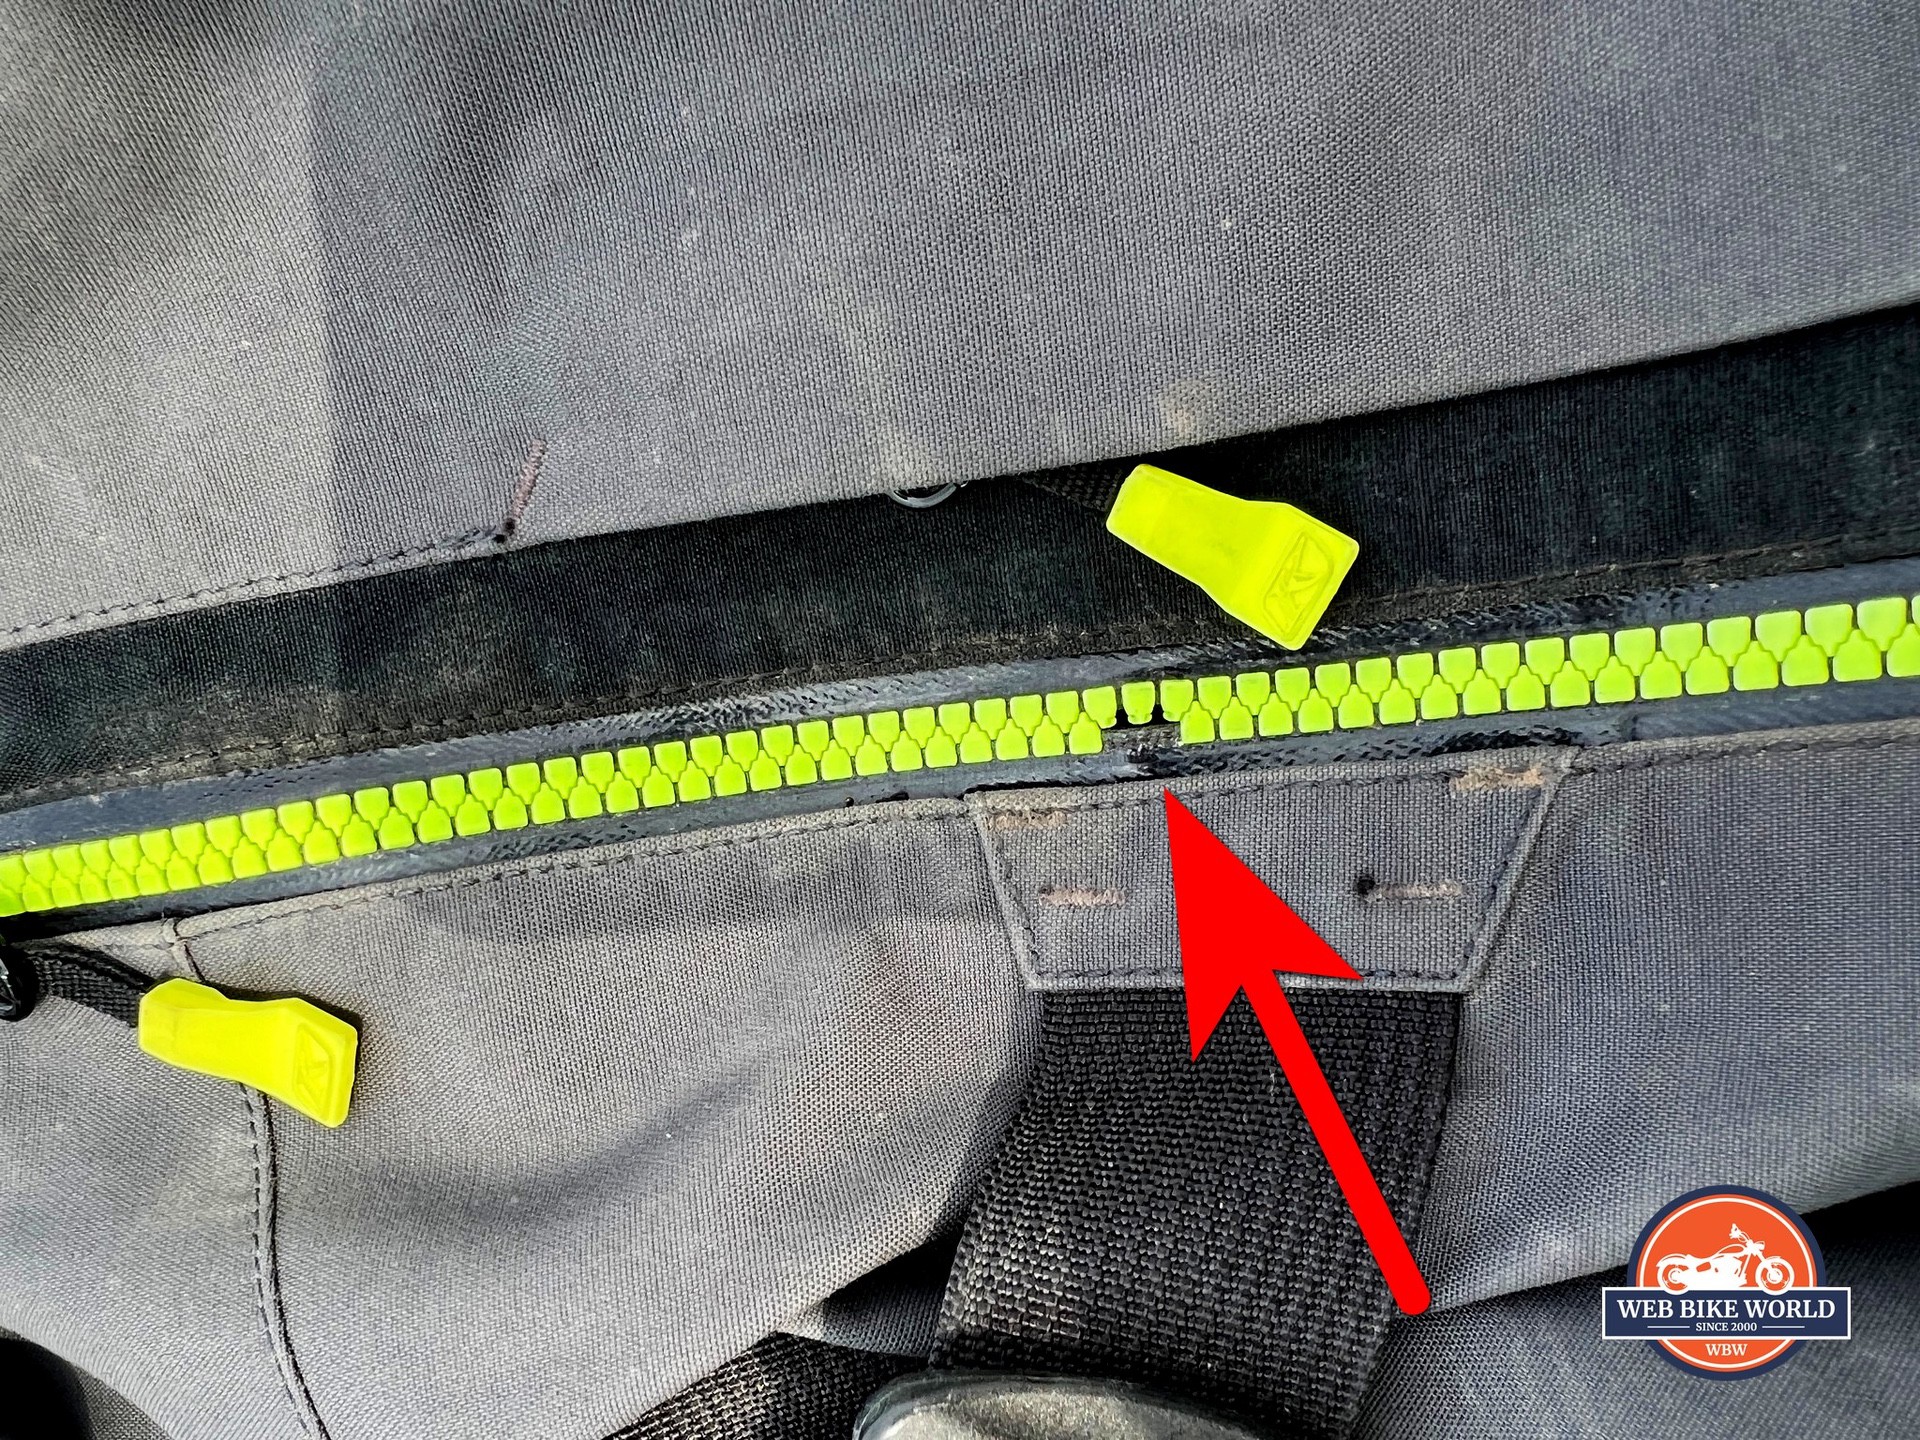 The right-side vent zipper broke on my Raptor GTX jacket during testing.